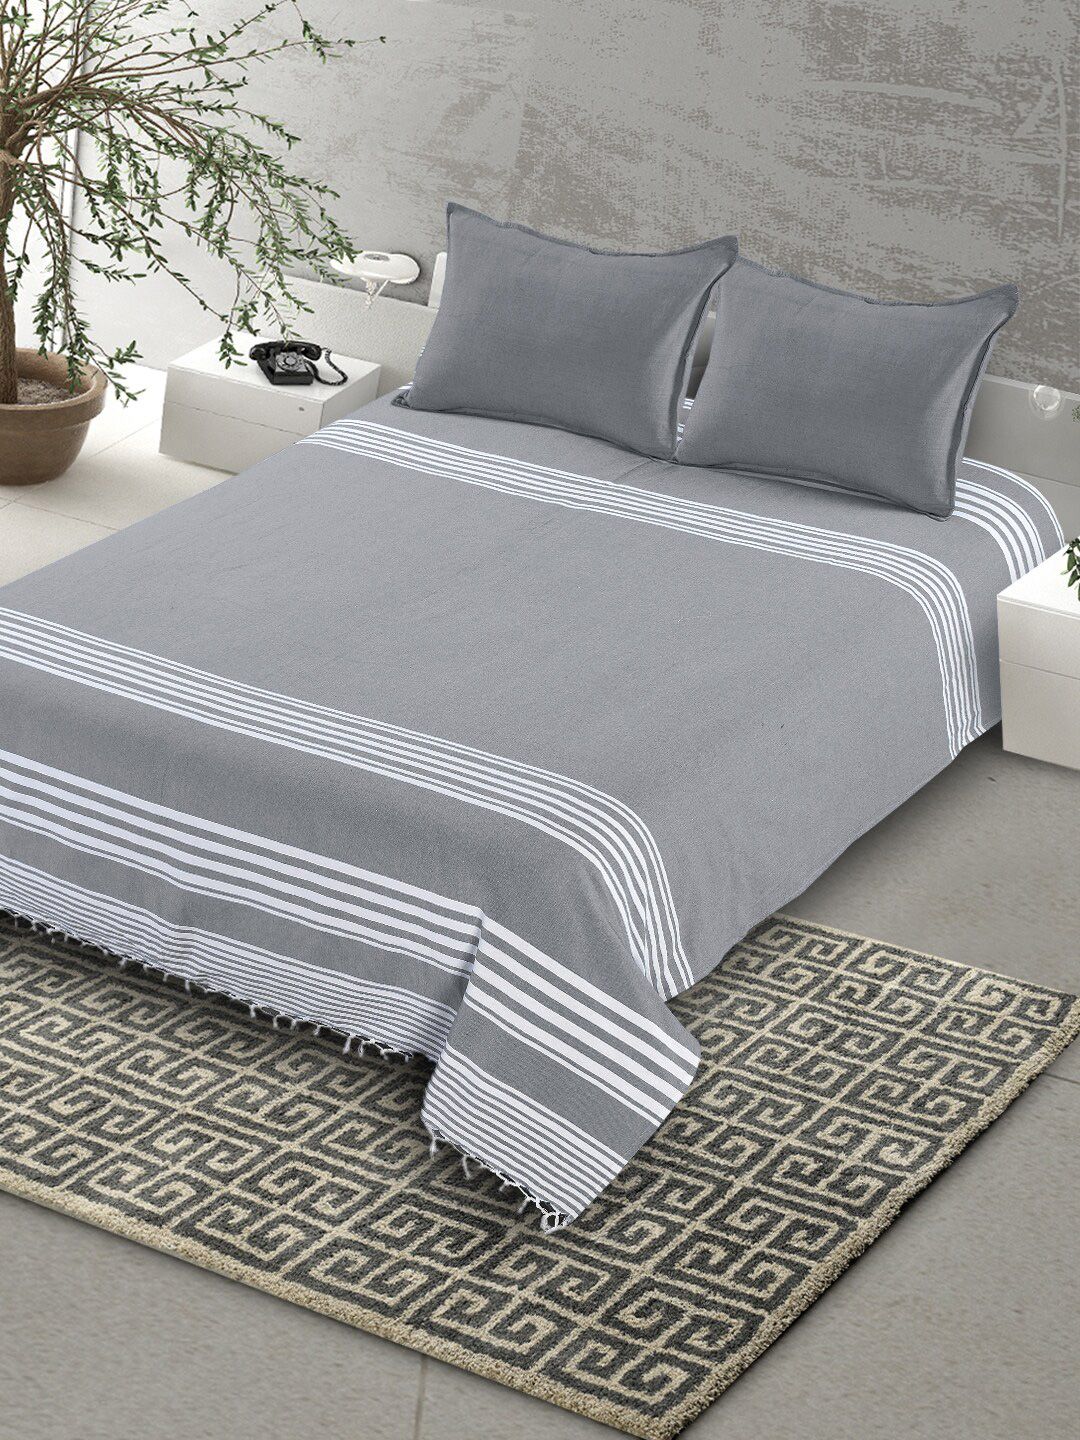 Saral Home Grey & White Striped Cotton 160 TC King Bedsheet with 2 Pillow Covers Price in India